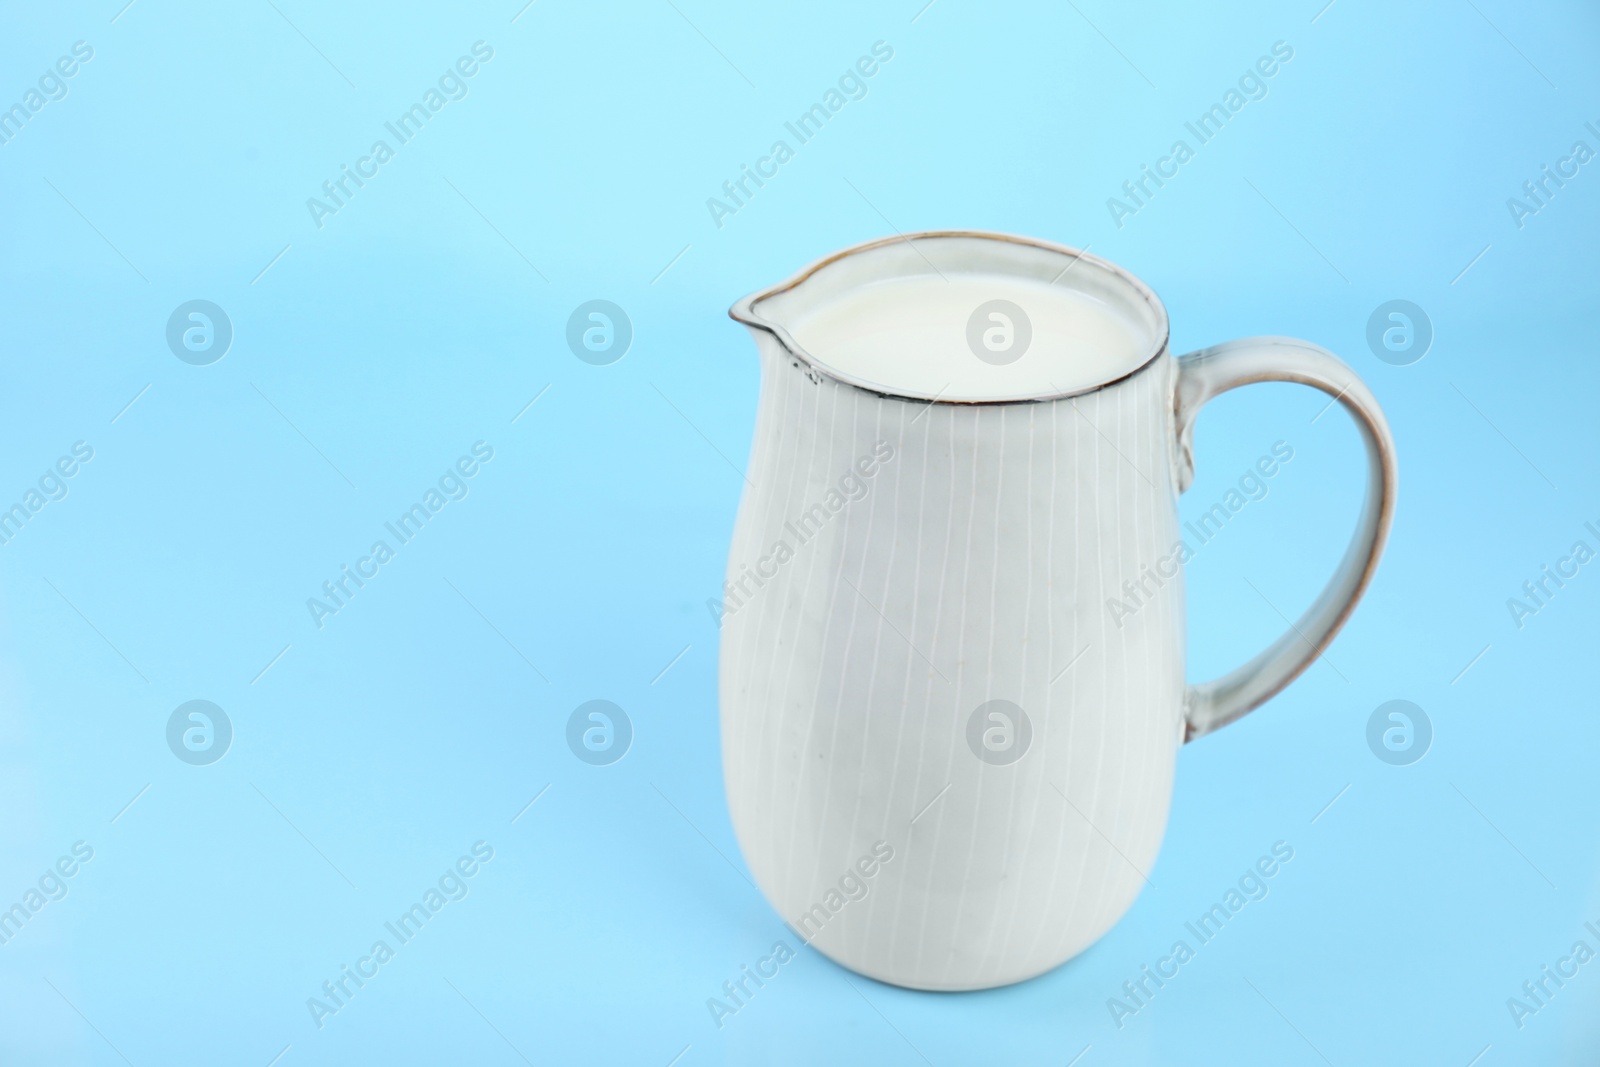 Photo of Jug of fresh milk on light blue background, space for text